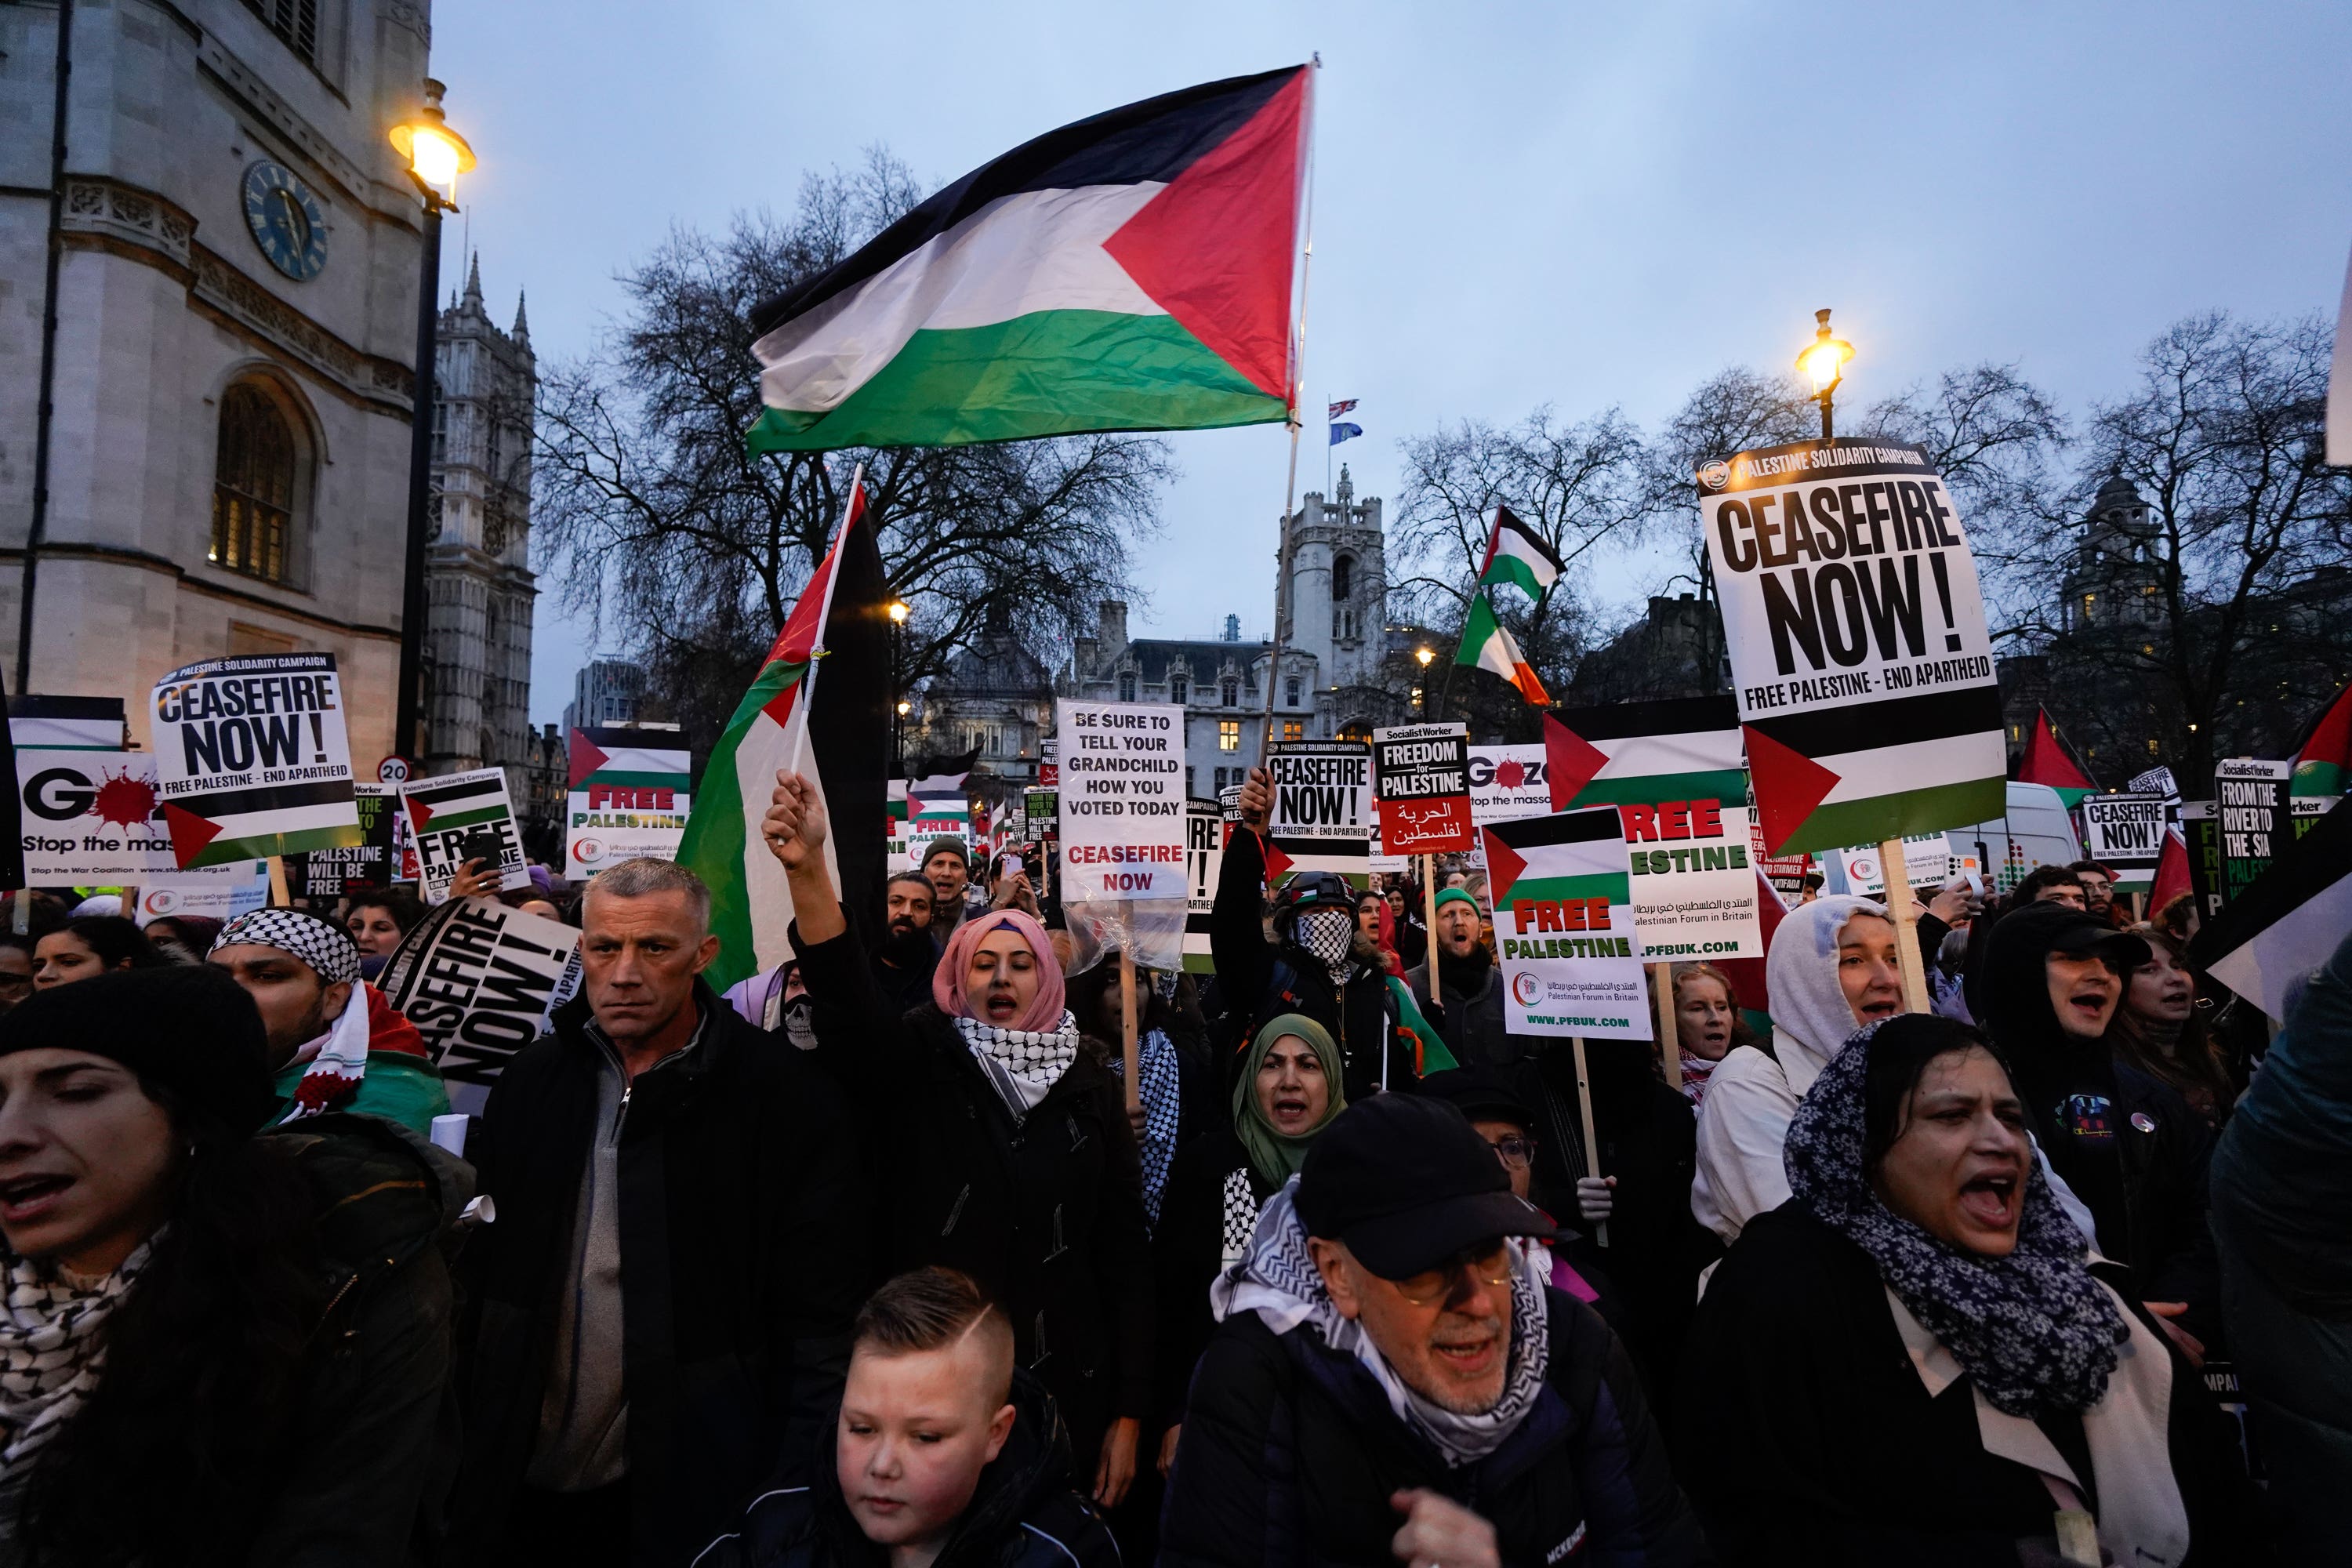 People take part in a Palestine Solidarity Campaign rally outside the Houses of Parliament, London, as MPs debate calls for a ceasefire in Gaza (Lucy North/PA)